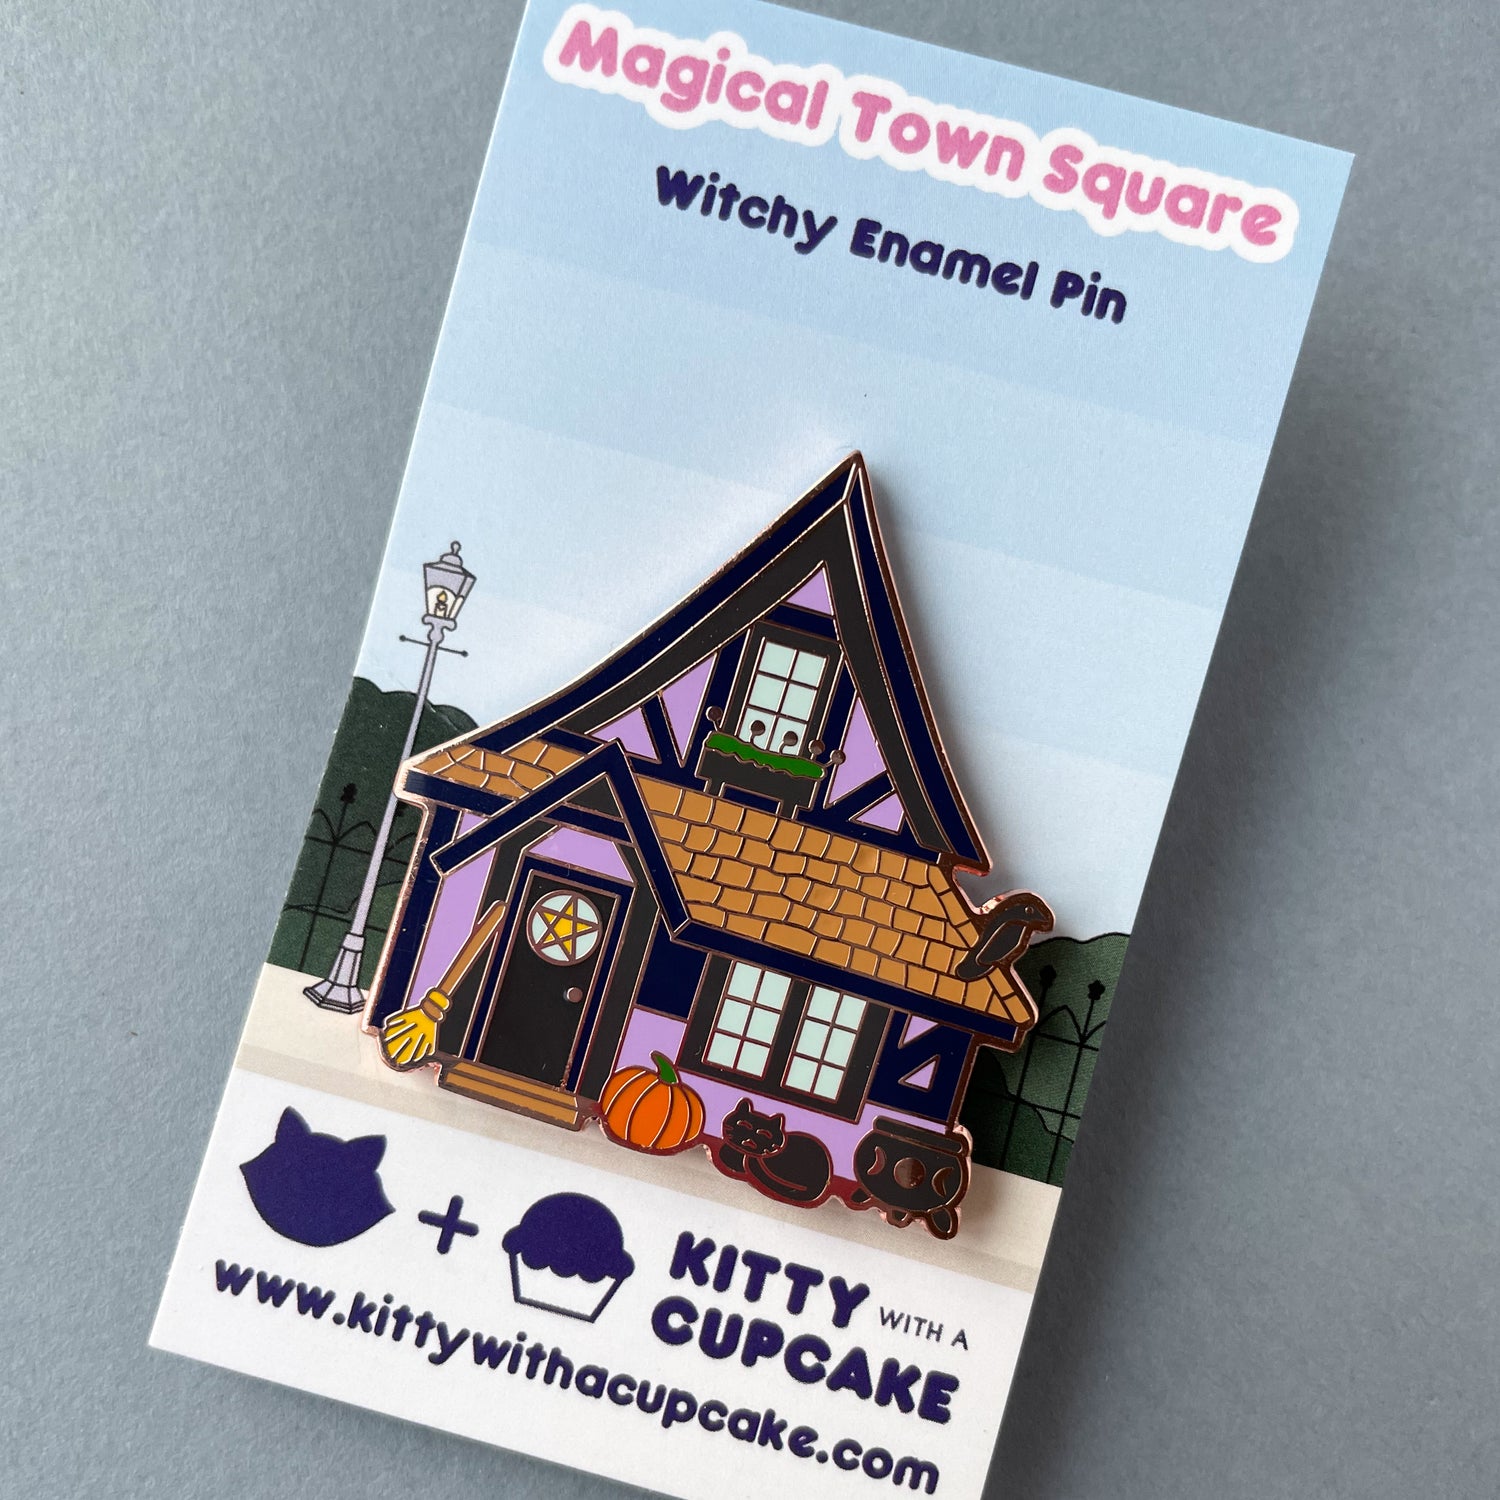 A purple house pin on a backing card that reads "Magical Town Square Witchy Enamel Pin". 